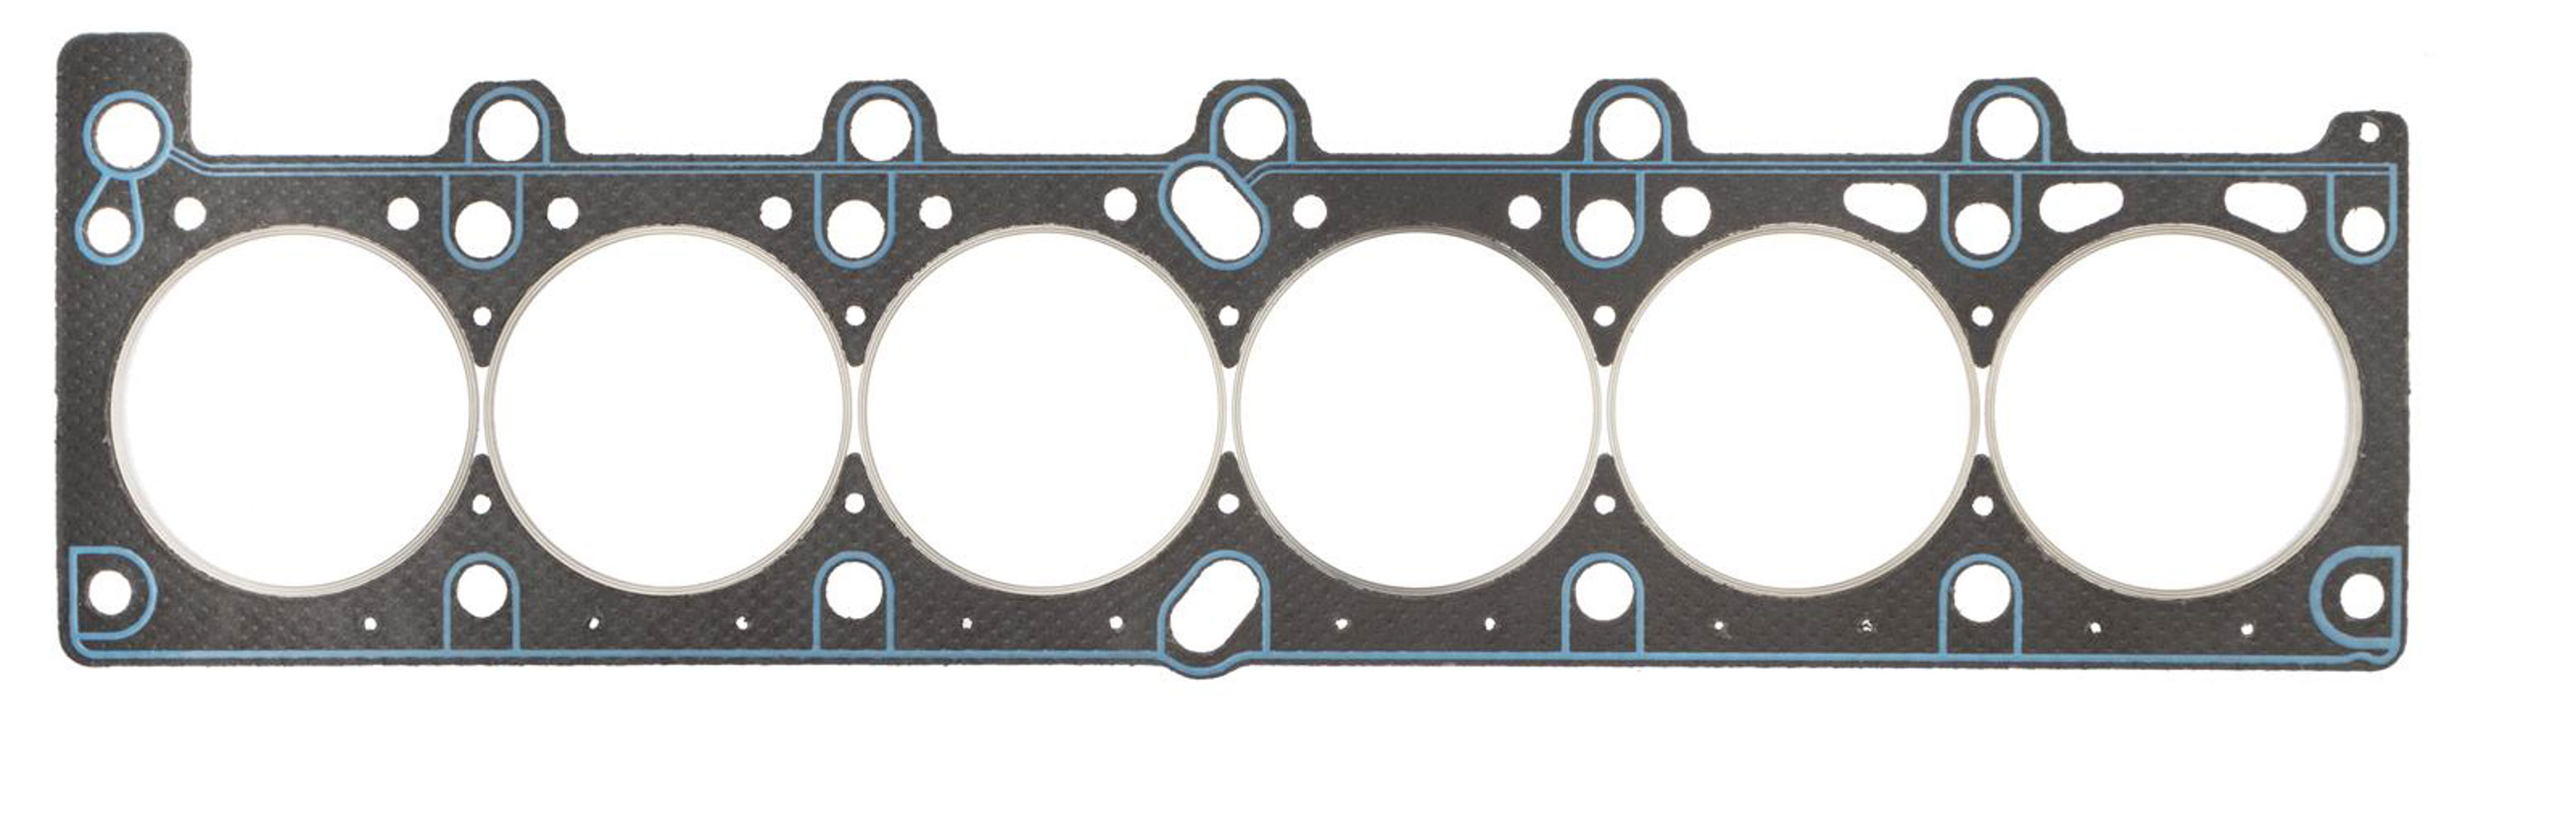 SCE Gaskets CR330015 - Cylinder Head Gasket, Vulcan Cut Ring, 85.50 mm Bore, 2.00 mm Compression Thickness, Steel Core Laminate, BMW Inline-6, Each